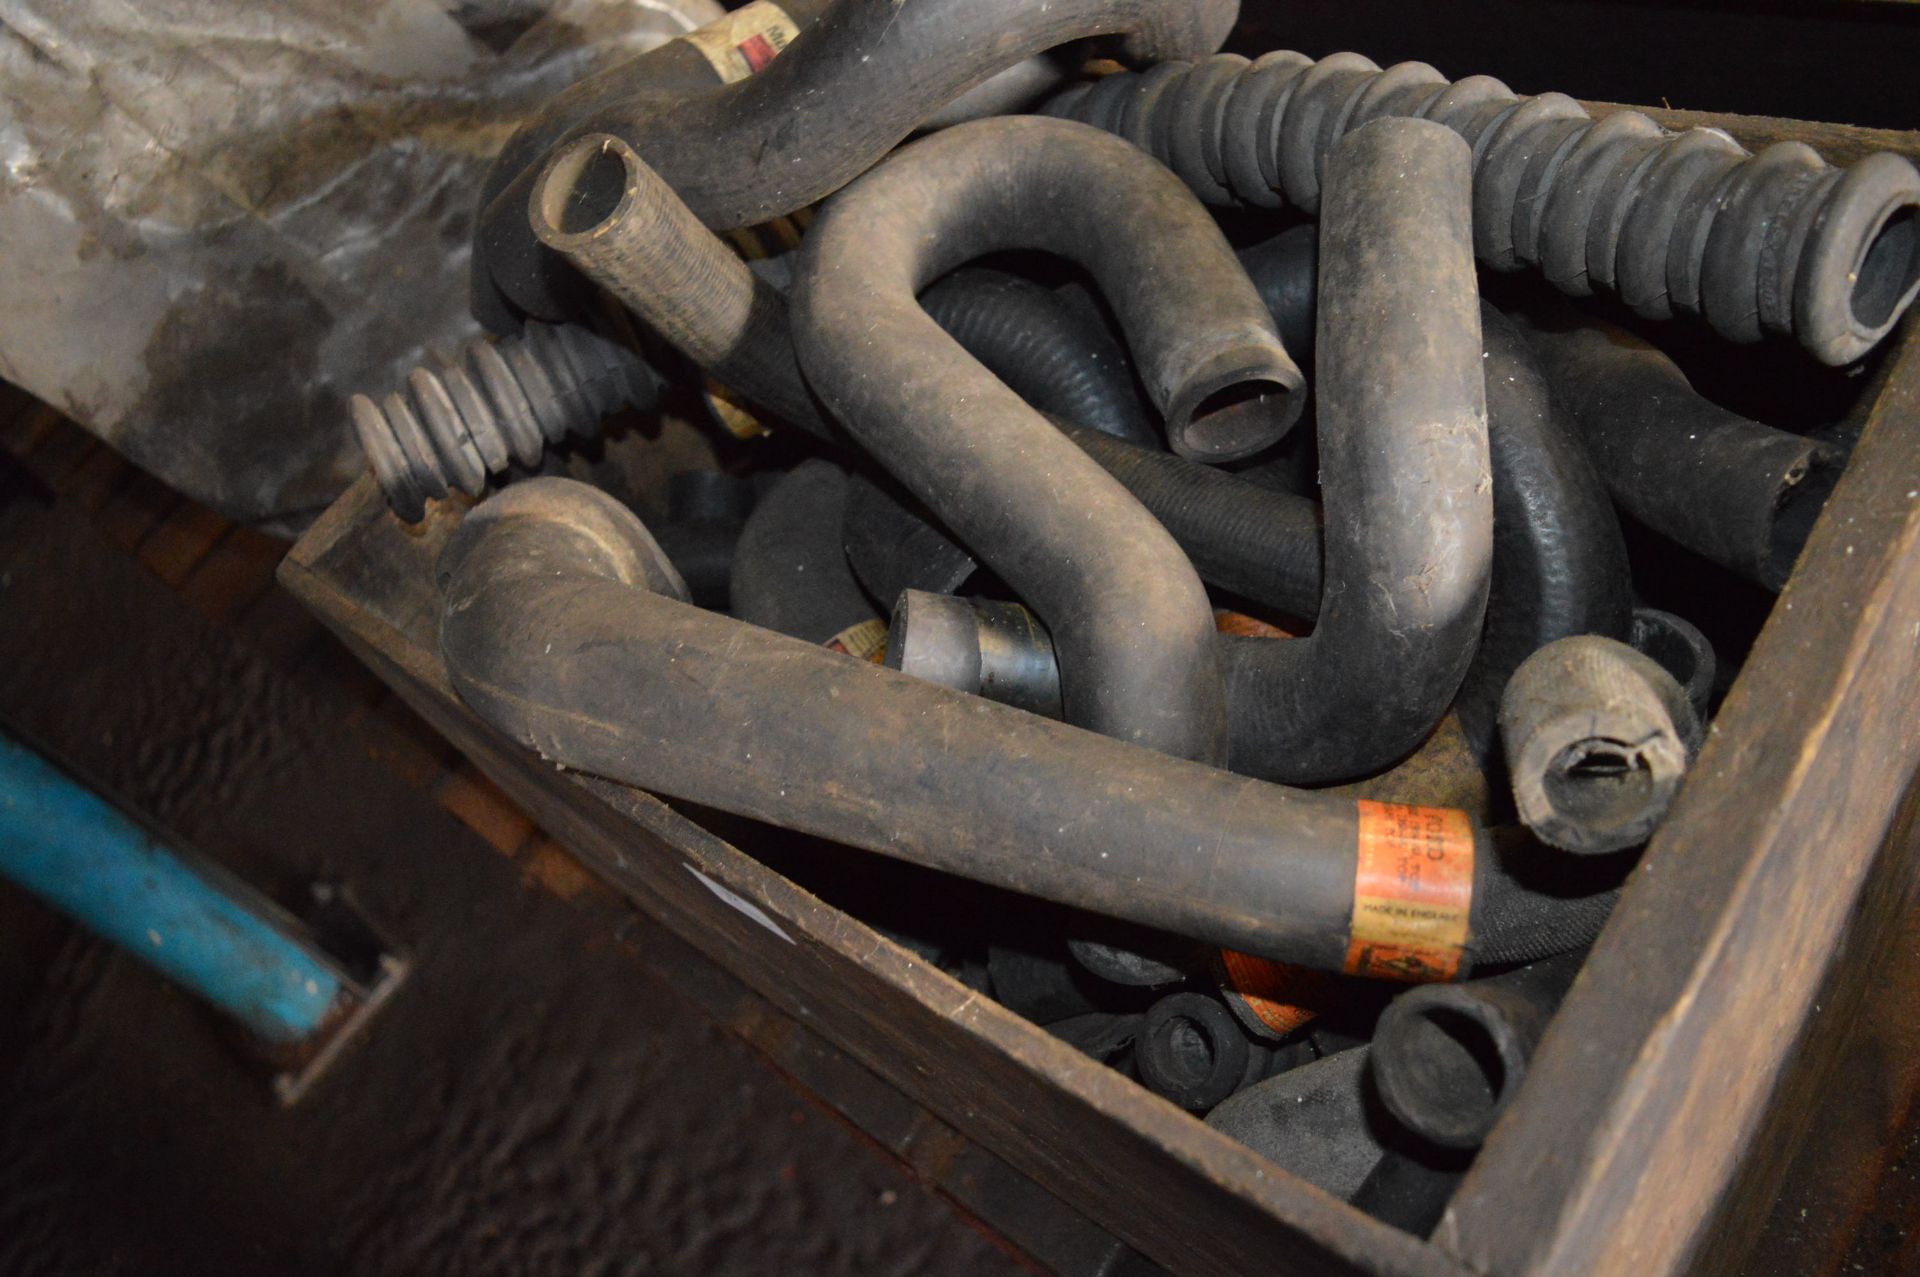 Box of Assorted Water Hoses for Older Vehicles and Classic Cars